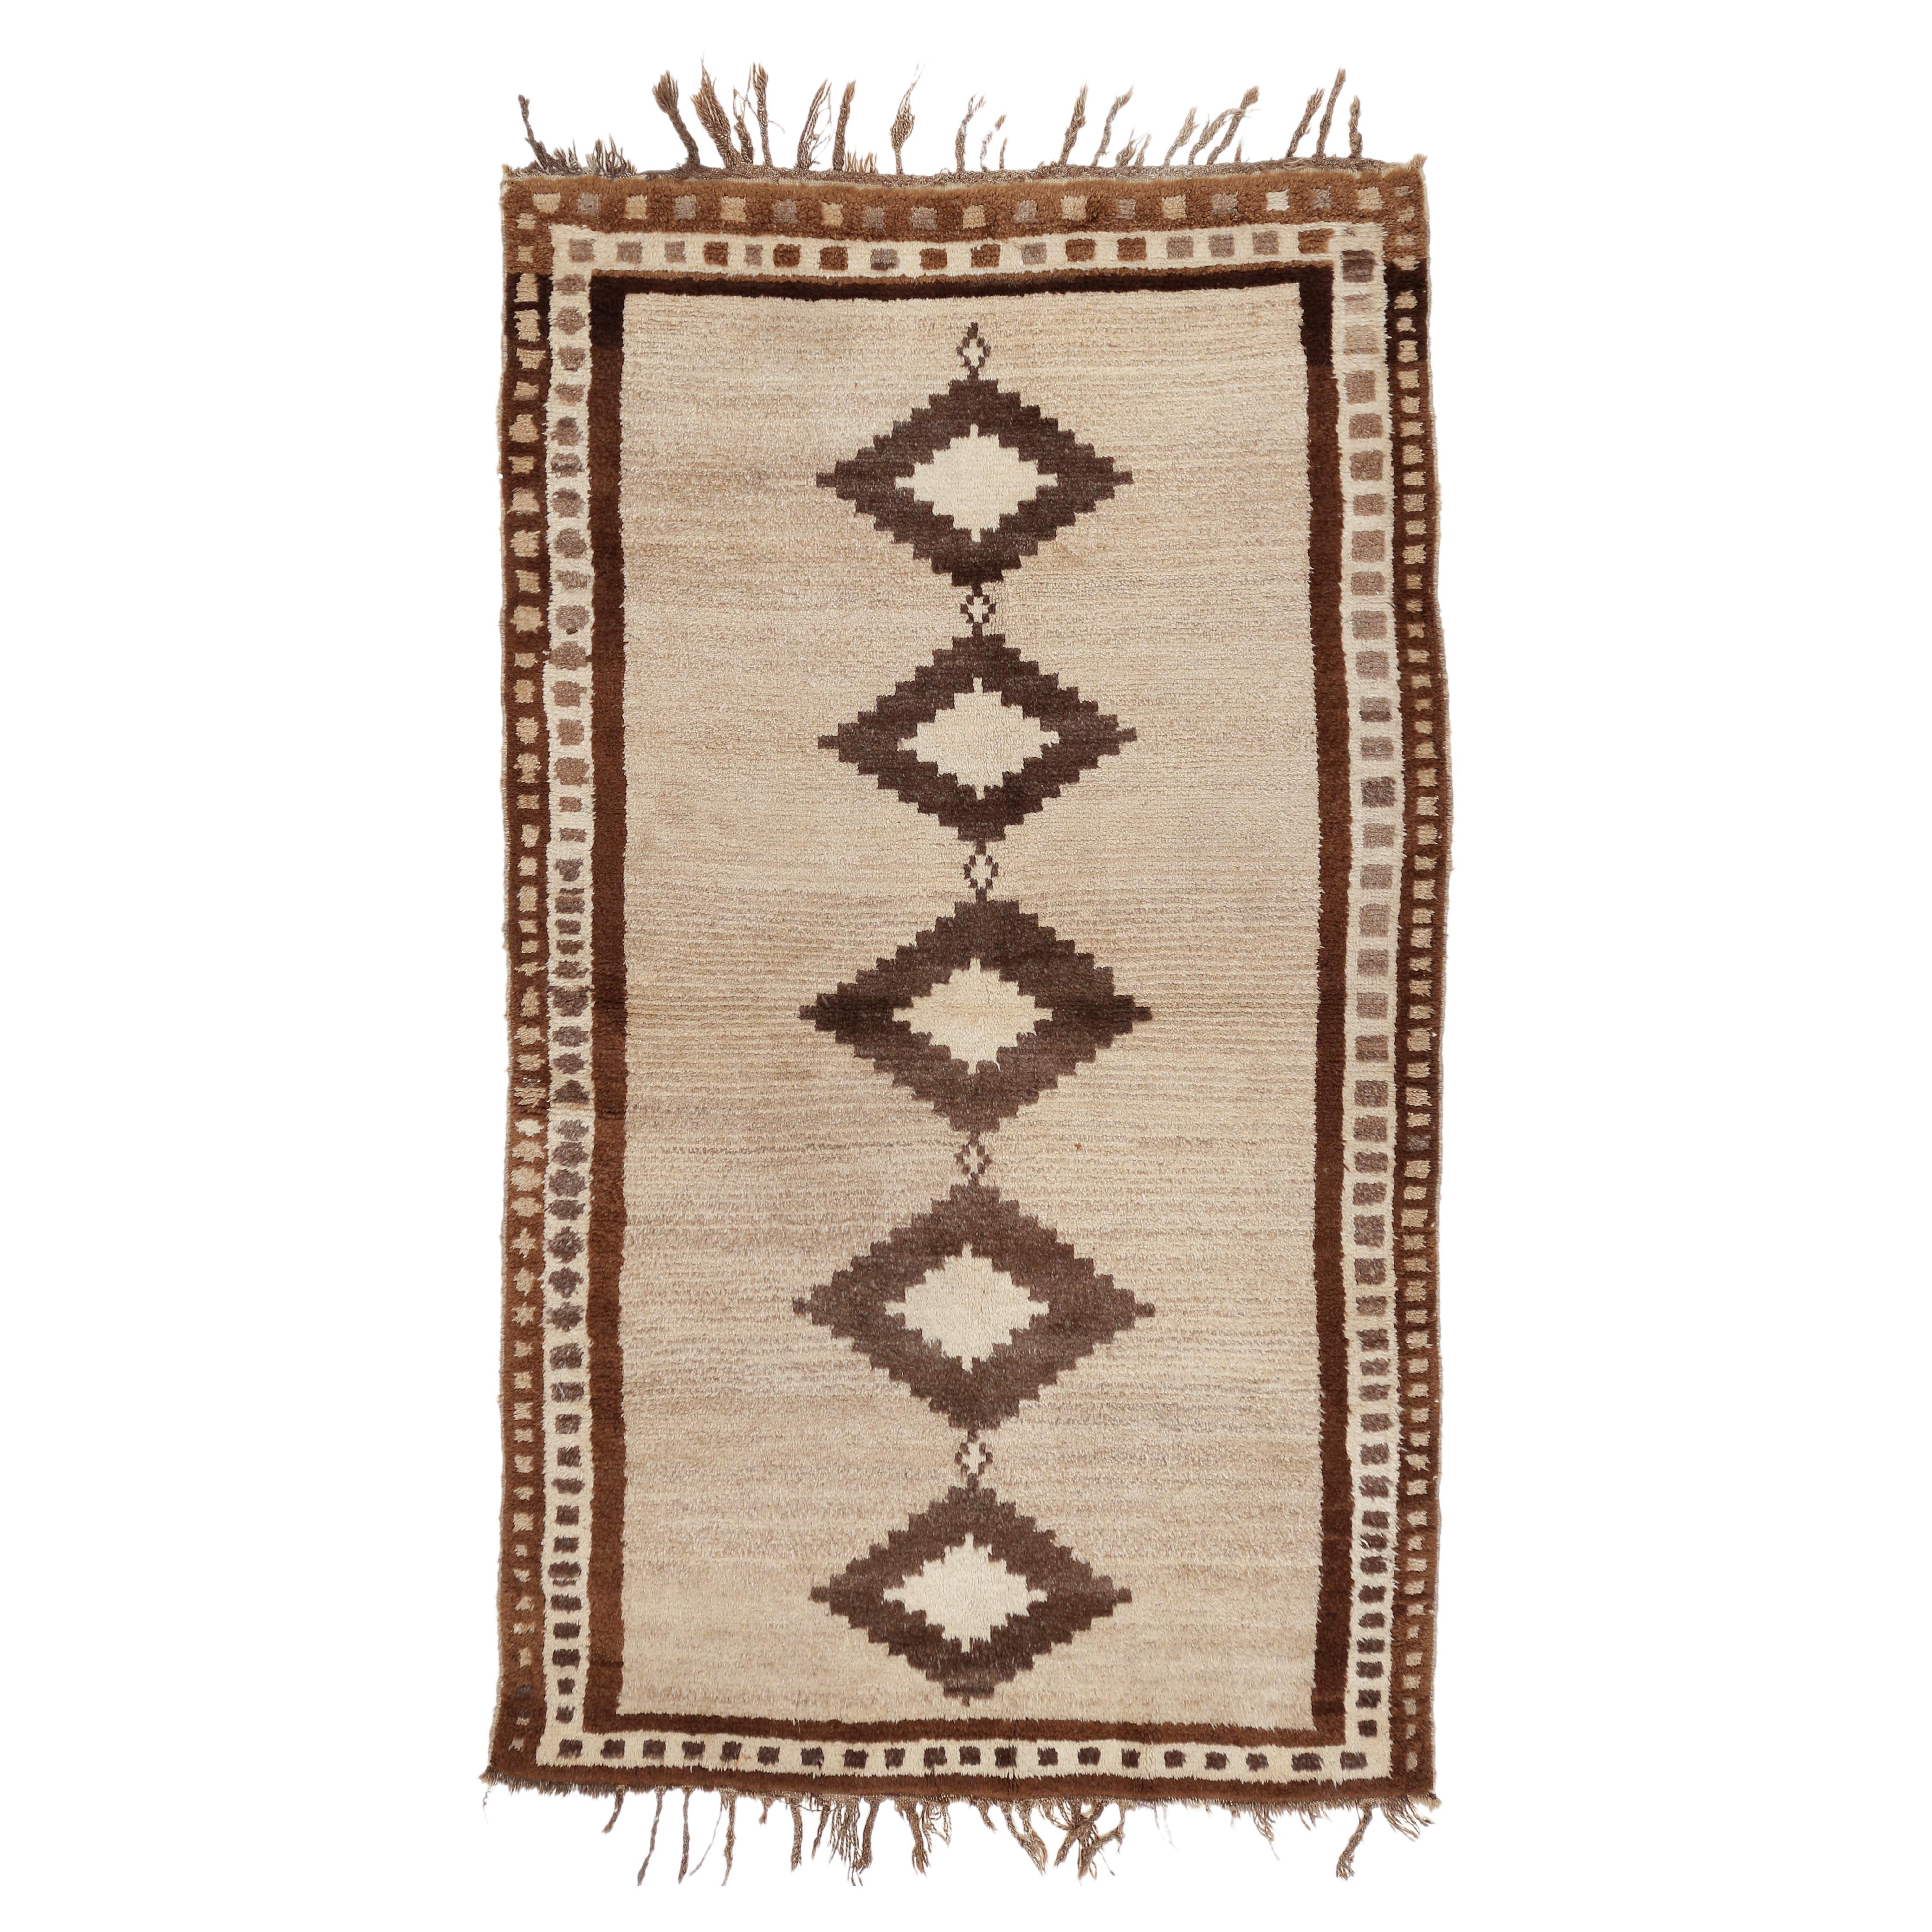 Antique Geometric Design Tribal Rug in Camel Hair and Mocha Neutral Colours